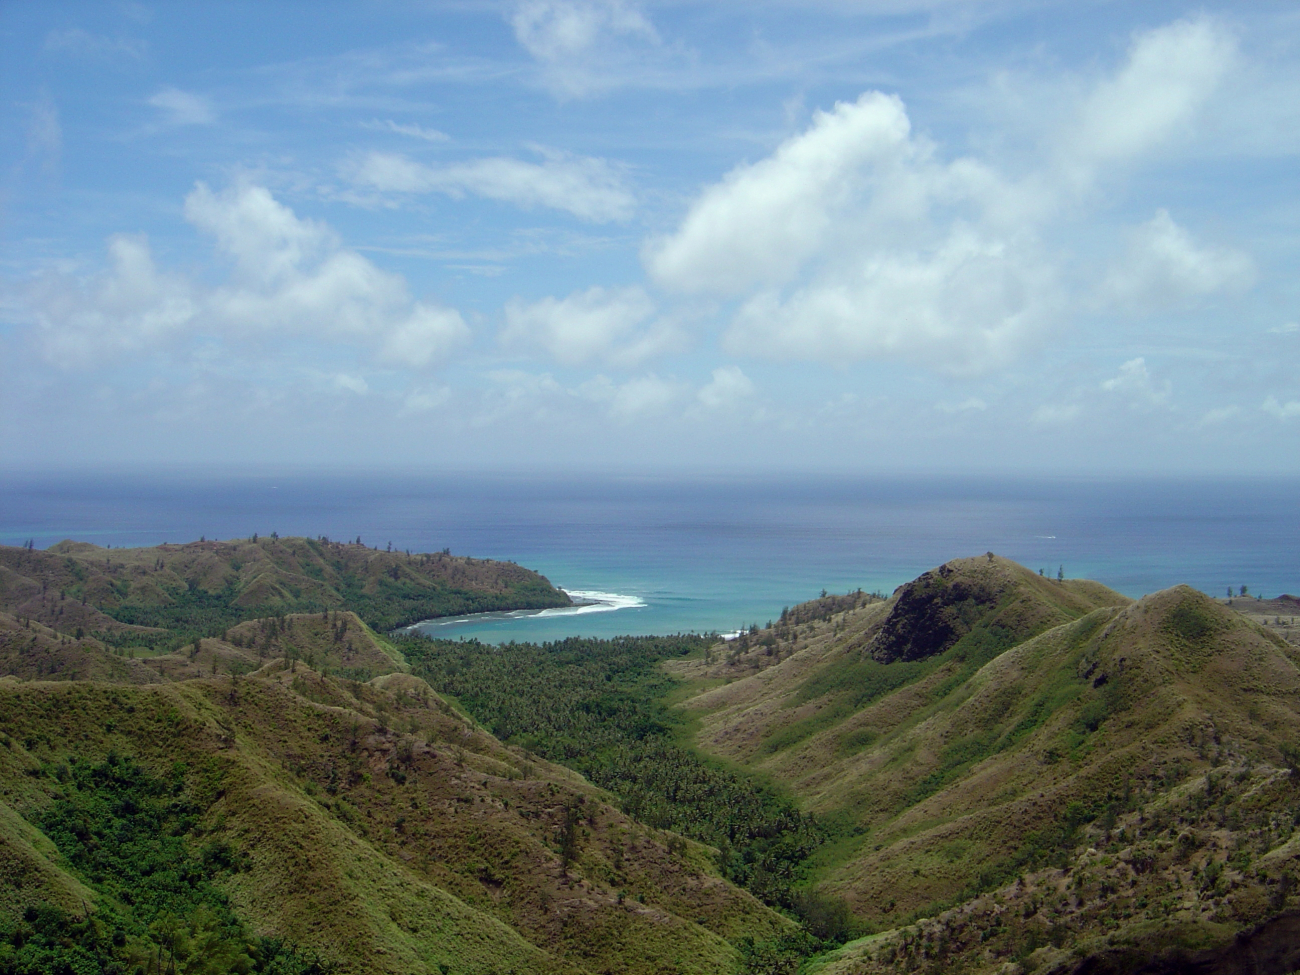 Cetti Bay, on the southern coast of Guam